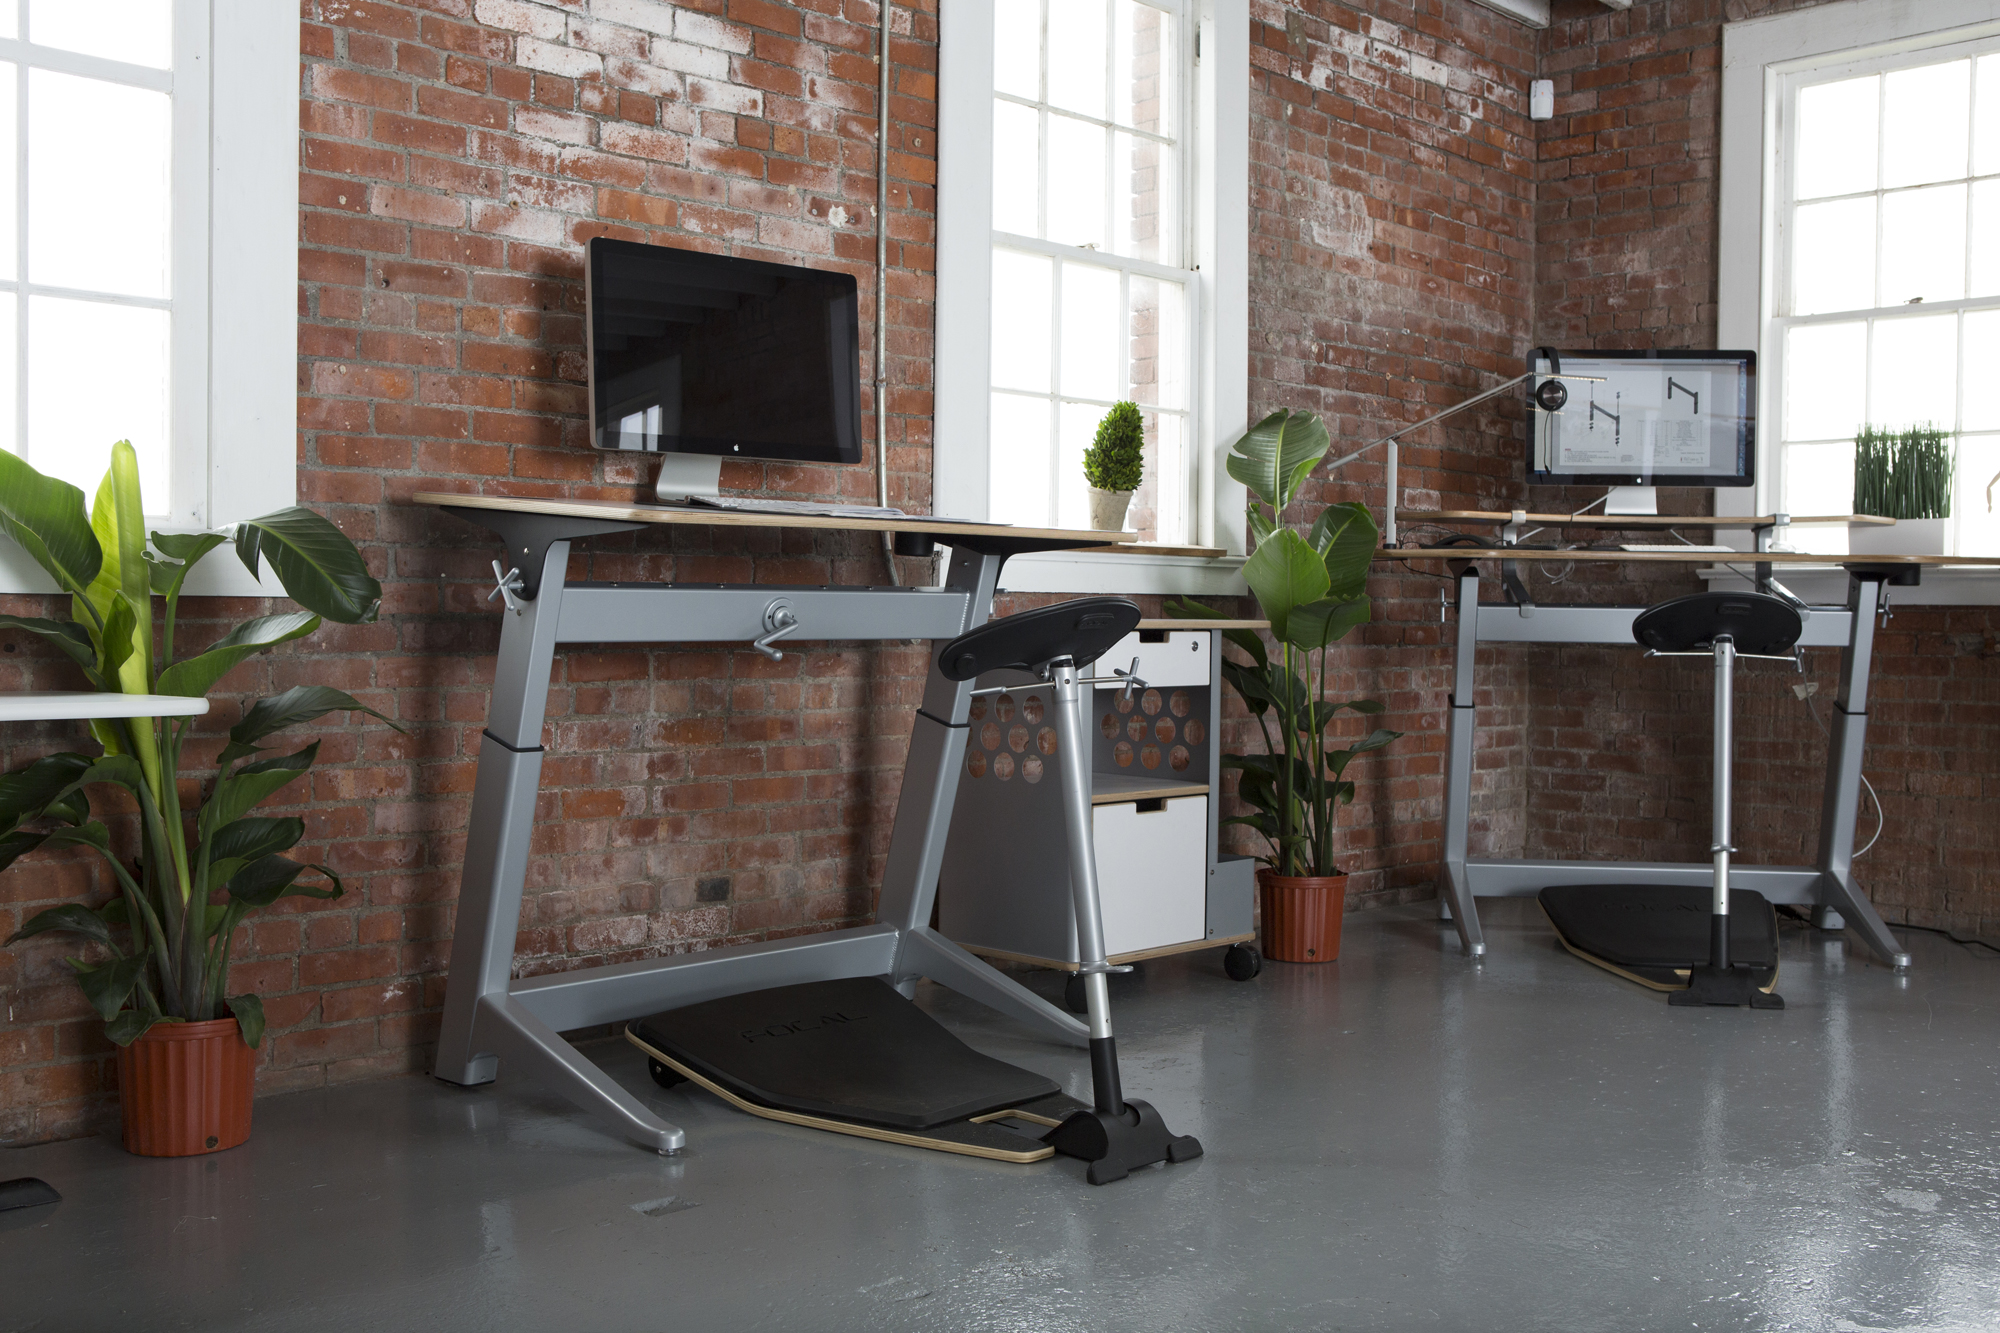 The award winning Locus and Sphere workstations from Focal Upright